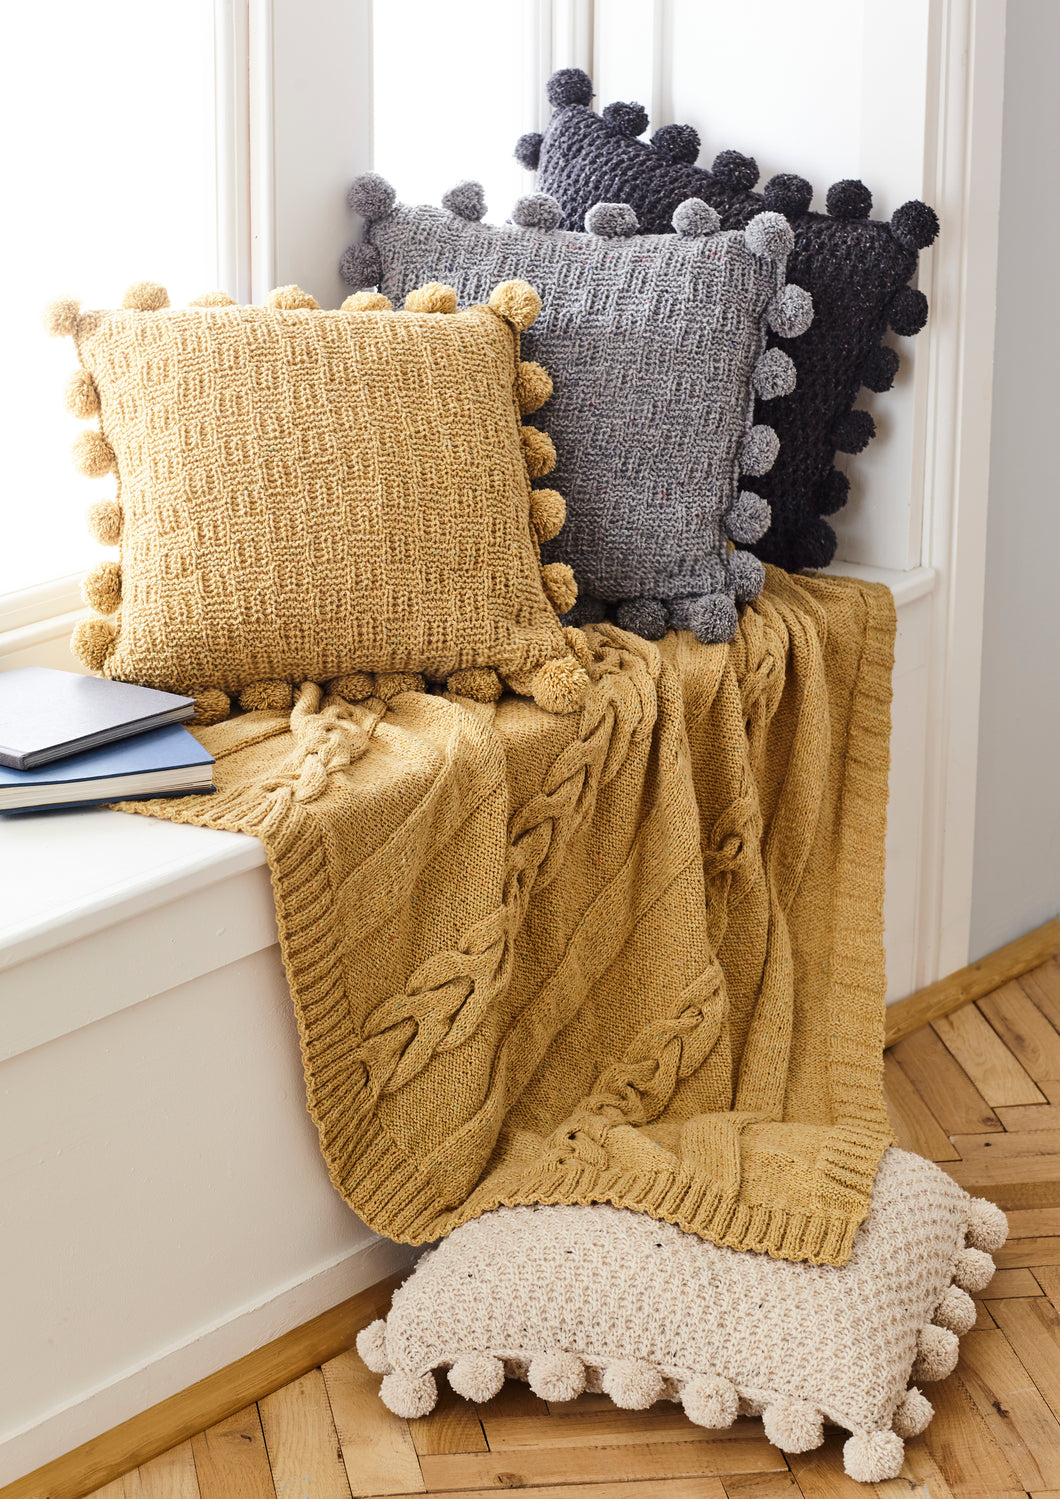 King Cole Pattern 5661: Cushions and Throw